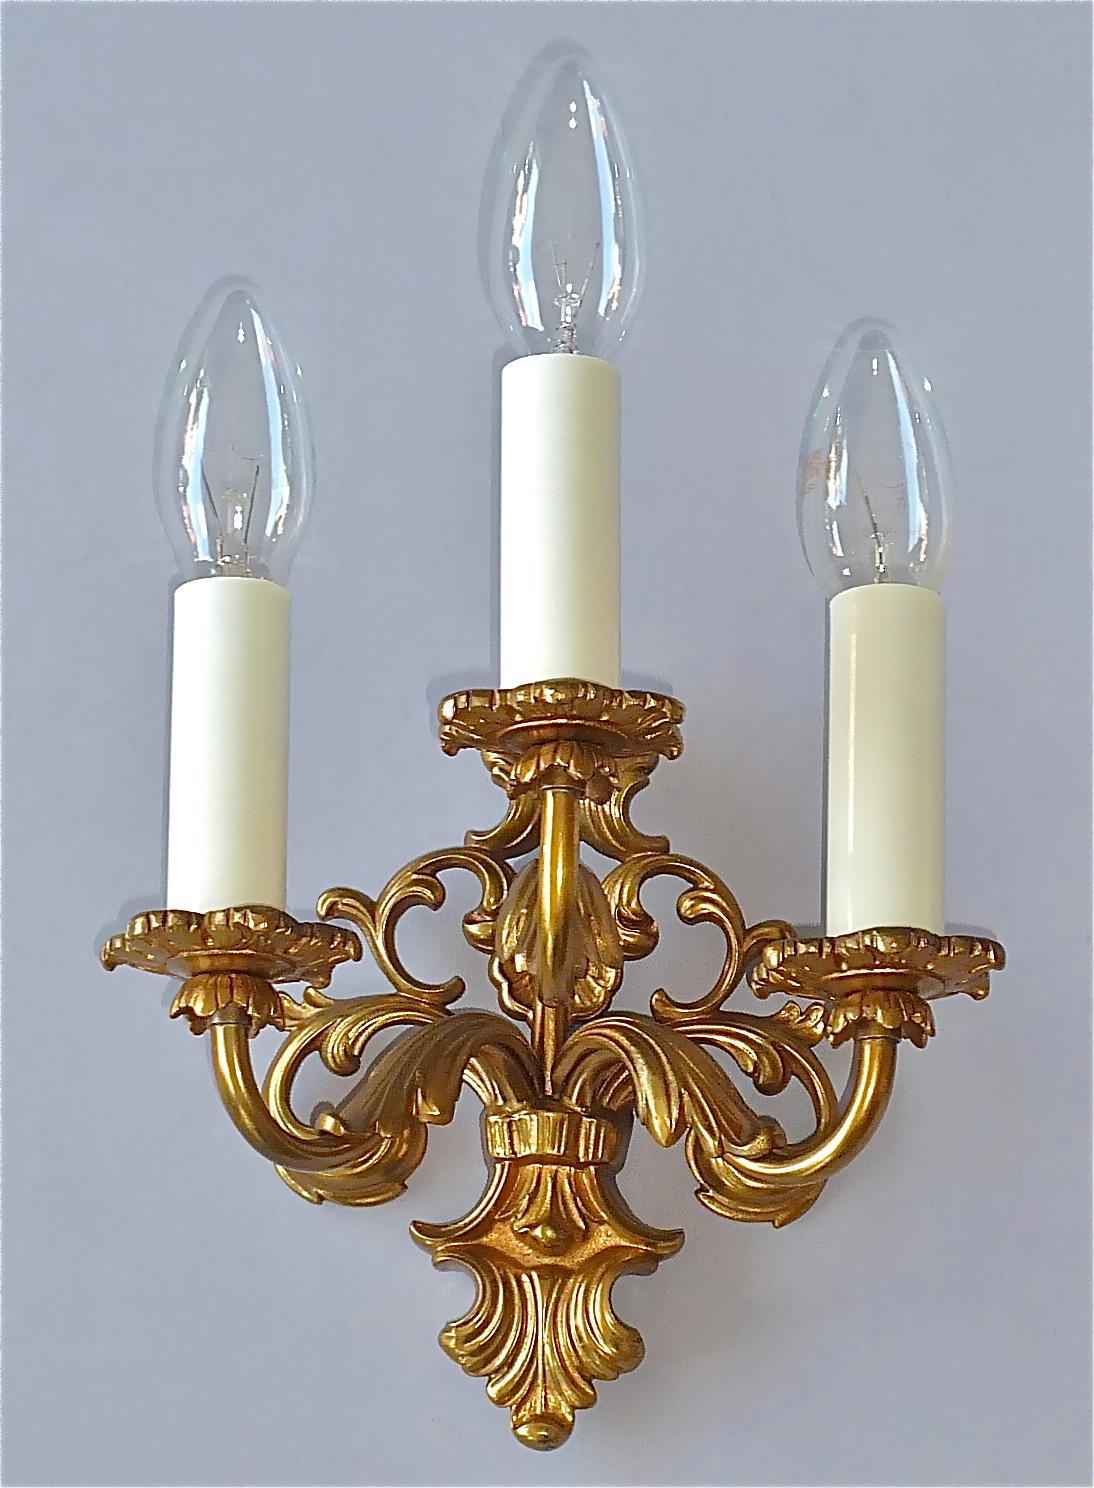 Elegant and fine pair of floral three-arm gilt bronze metal Baroque / Rococo style wall lights or sconces, possibly Maison Bagues, France circa 1950s. The beautiful and classical lights with the typical decor of this period are new rewired, so fine